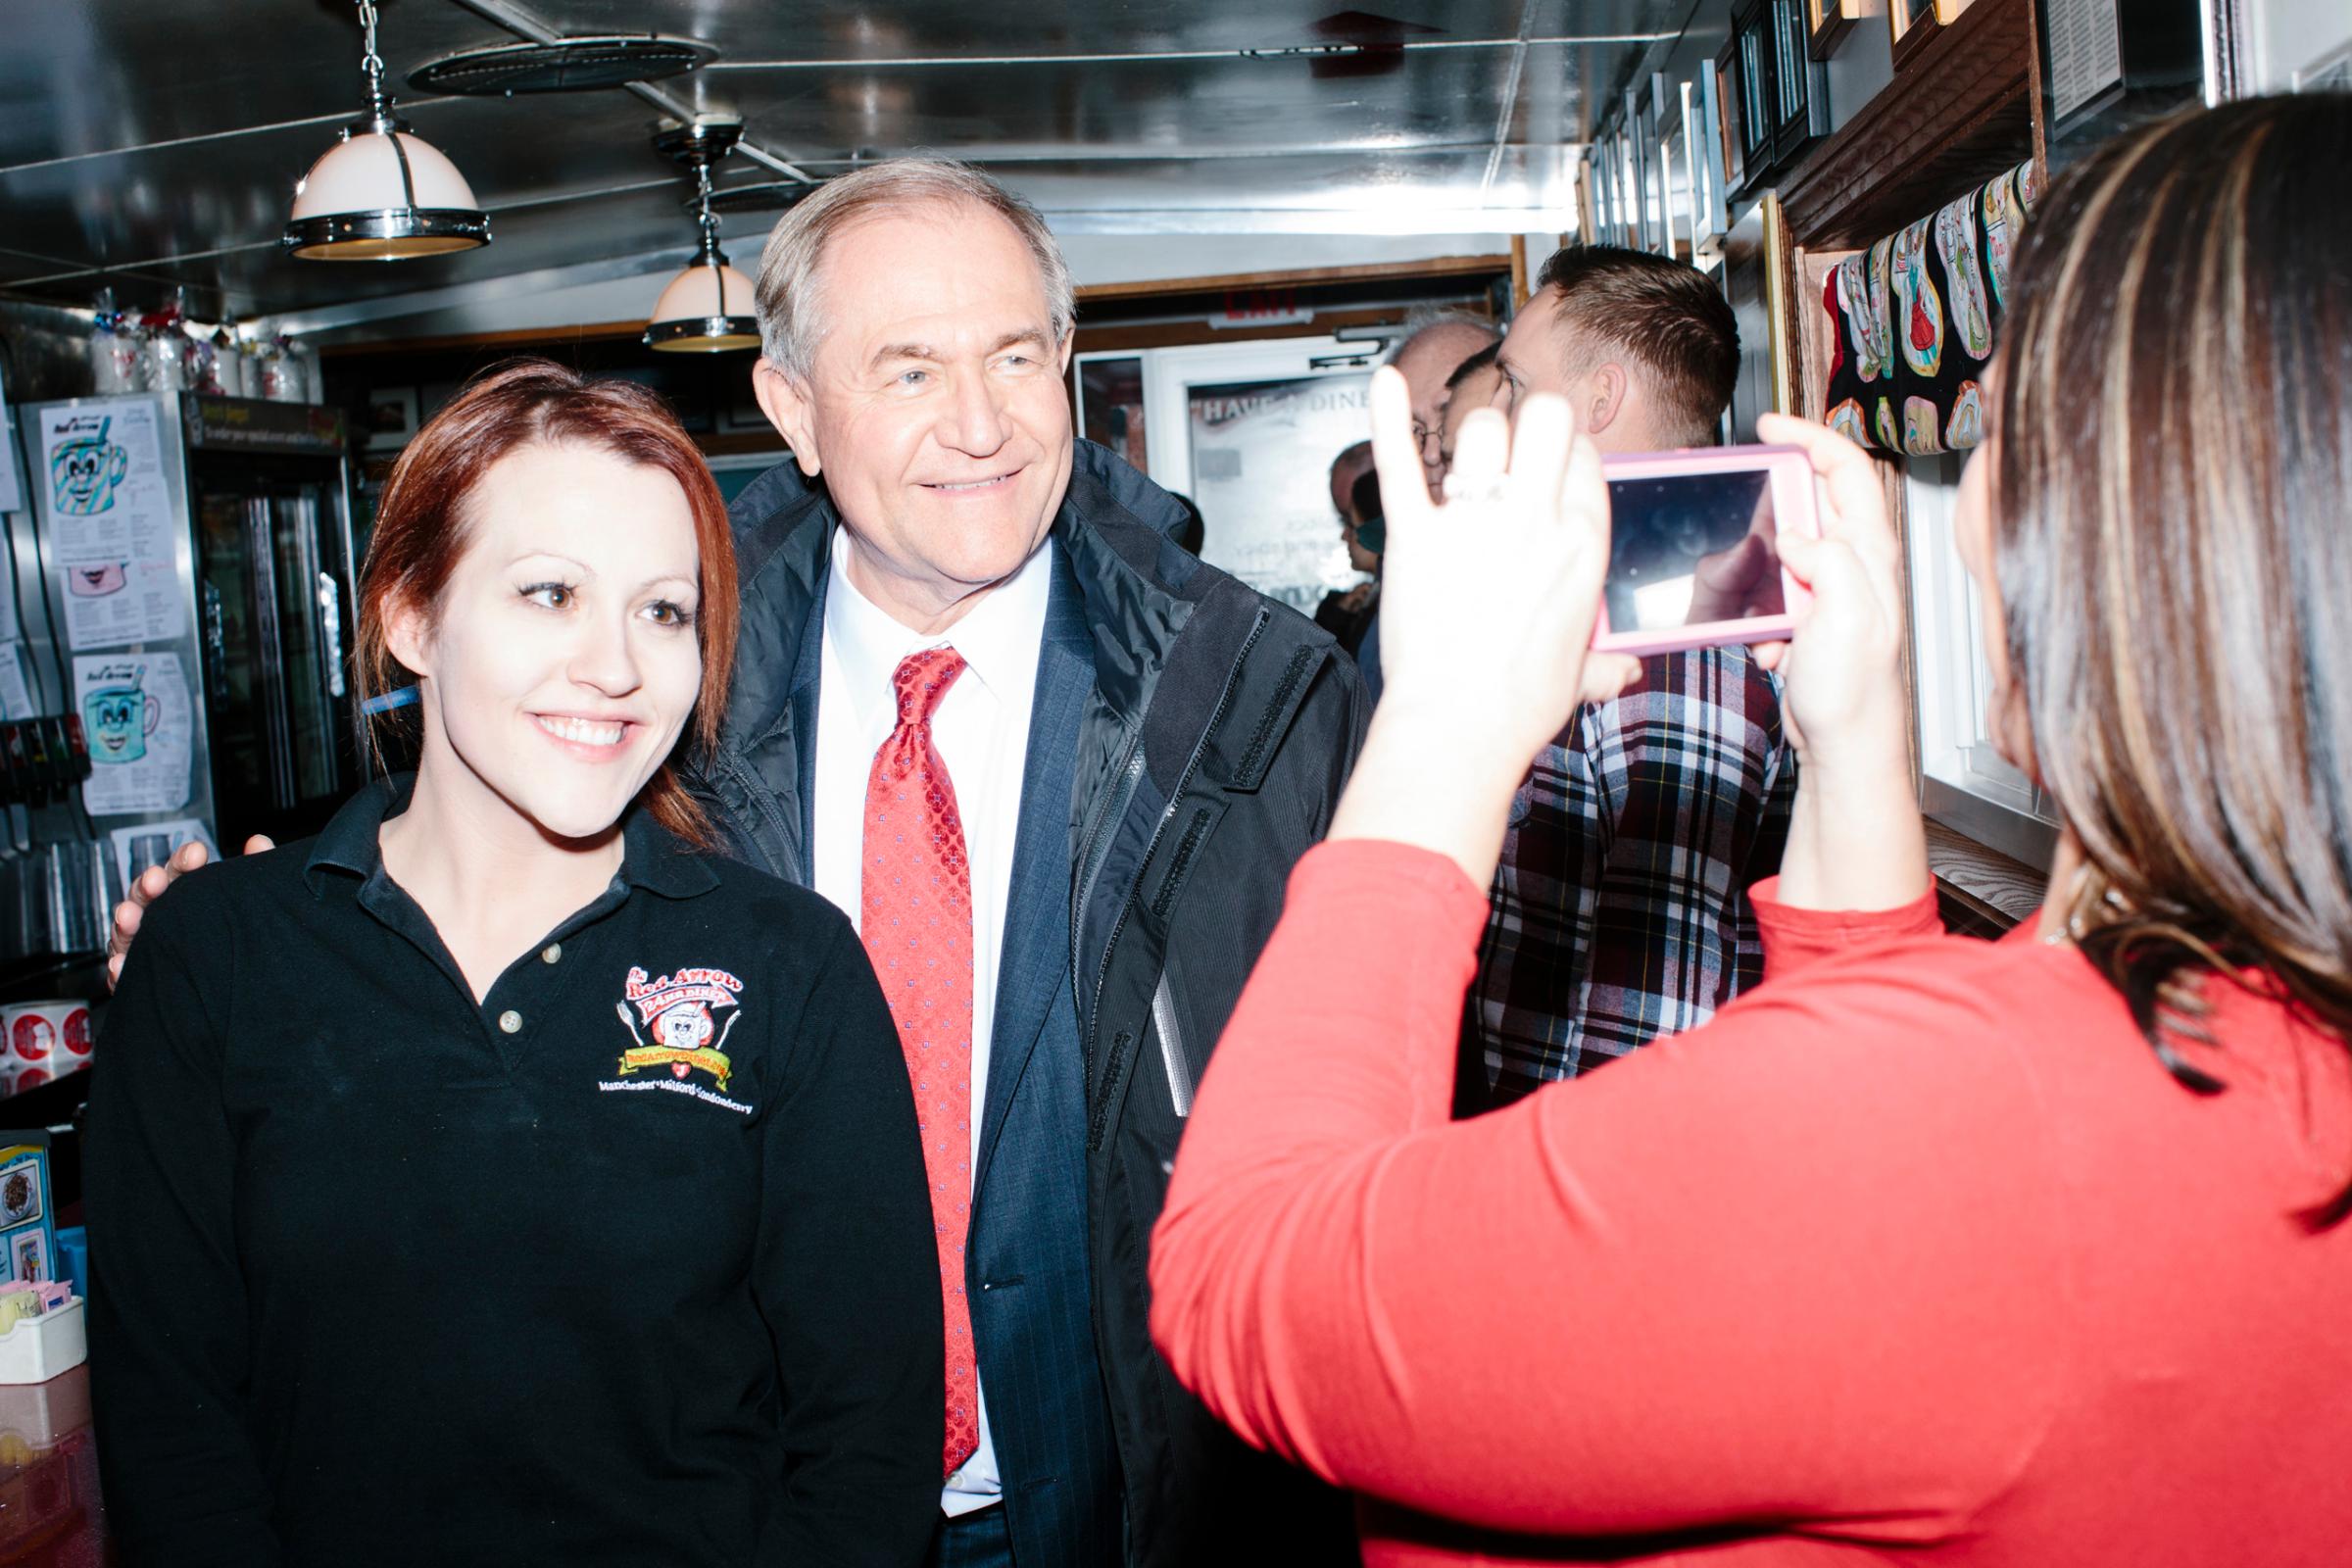 Former Virginia governor and Republican presidential candidate Jim Gilmore poses for a picture with general manager Jayme Lemay, of Nashua, NH, at the Red Arrow Diner in Manchester, New Hampshire, on Mon., Feb. 8, 2016. The Red Arrow Diner is a frequent stop of political candidates. Sirius XM was broadcasting live from the diner Monday and Tuesday. Gilmore finished in last place among major Republican candidates still in the race with a total of 150 votes.